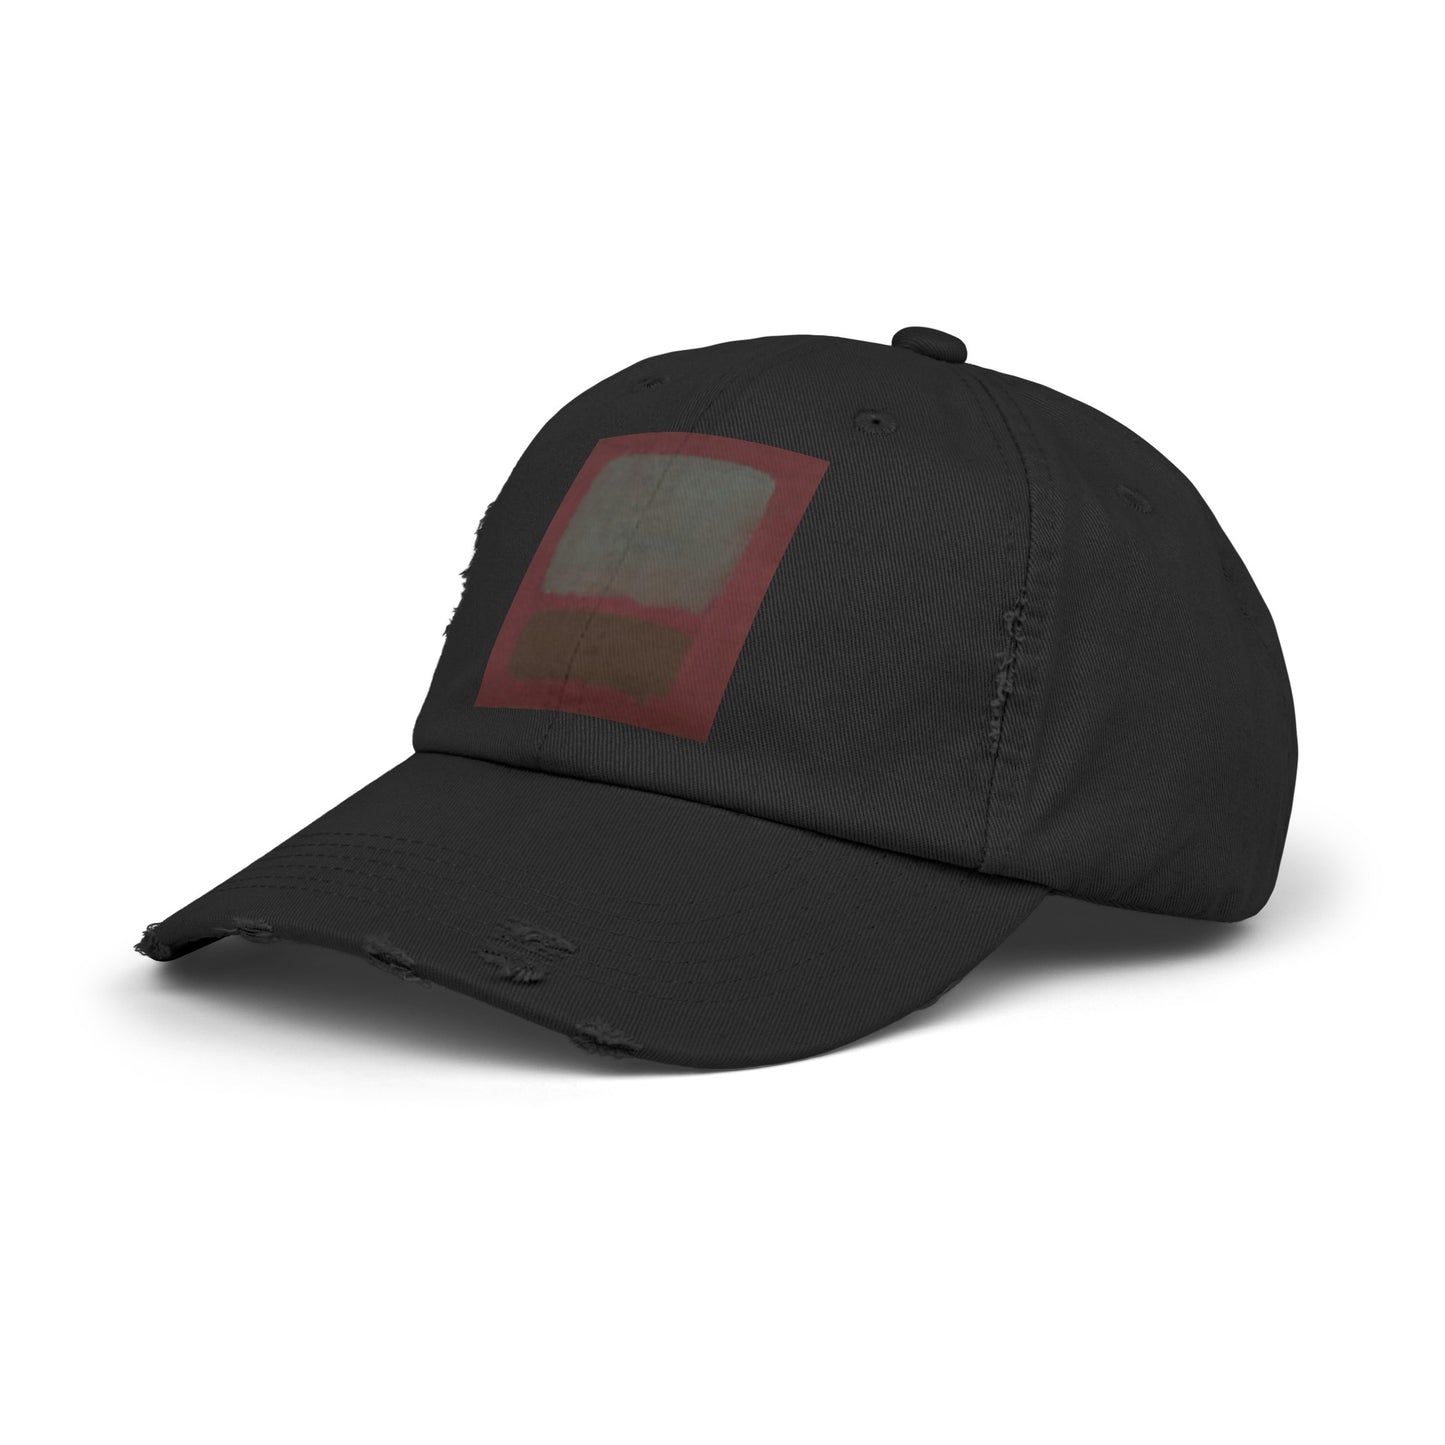 a black hat with a red patch on the front